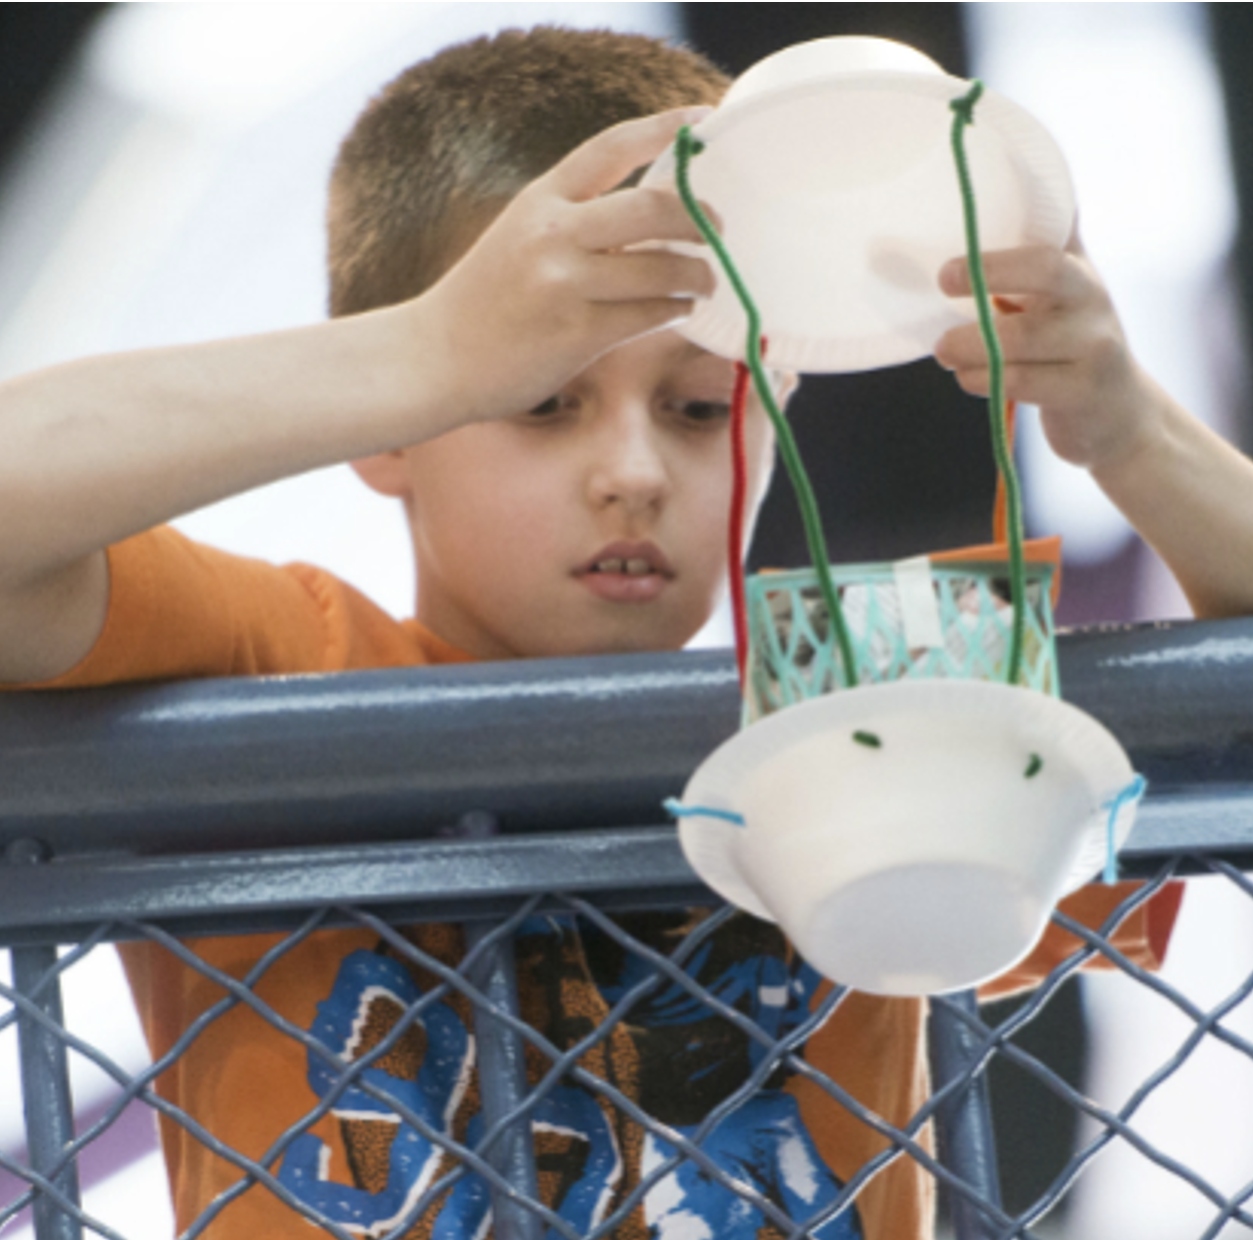 A child holds an egg drop contraption over a railing